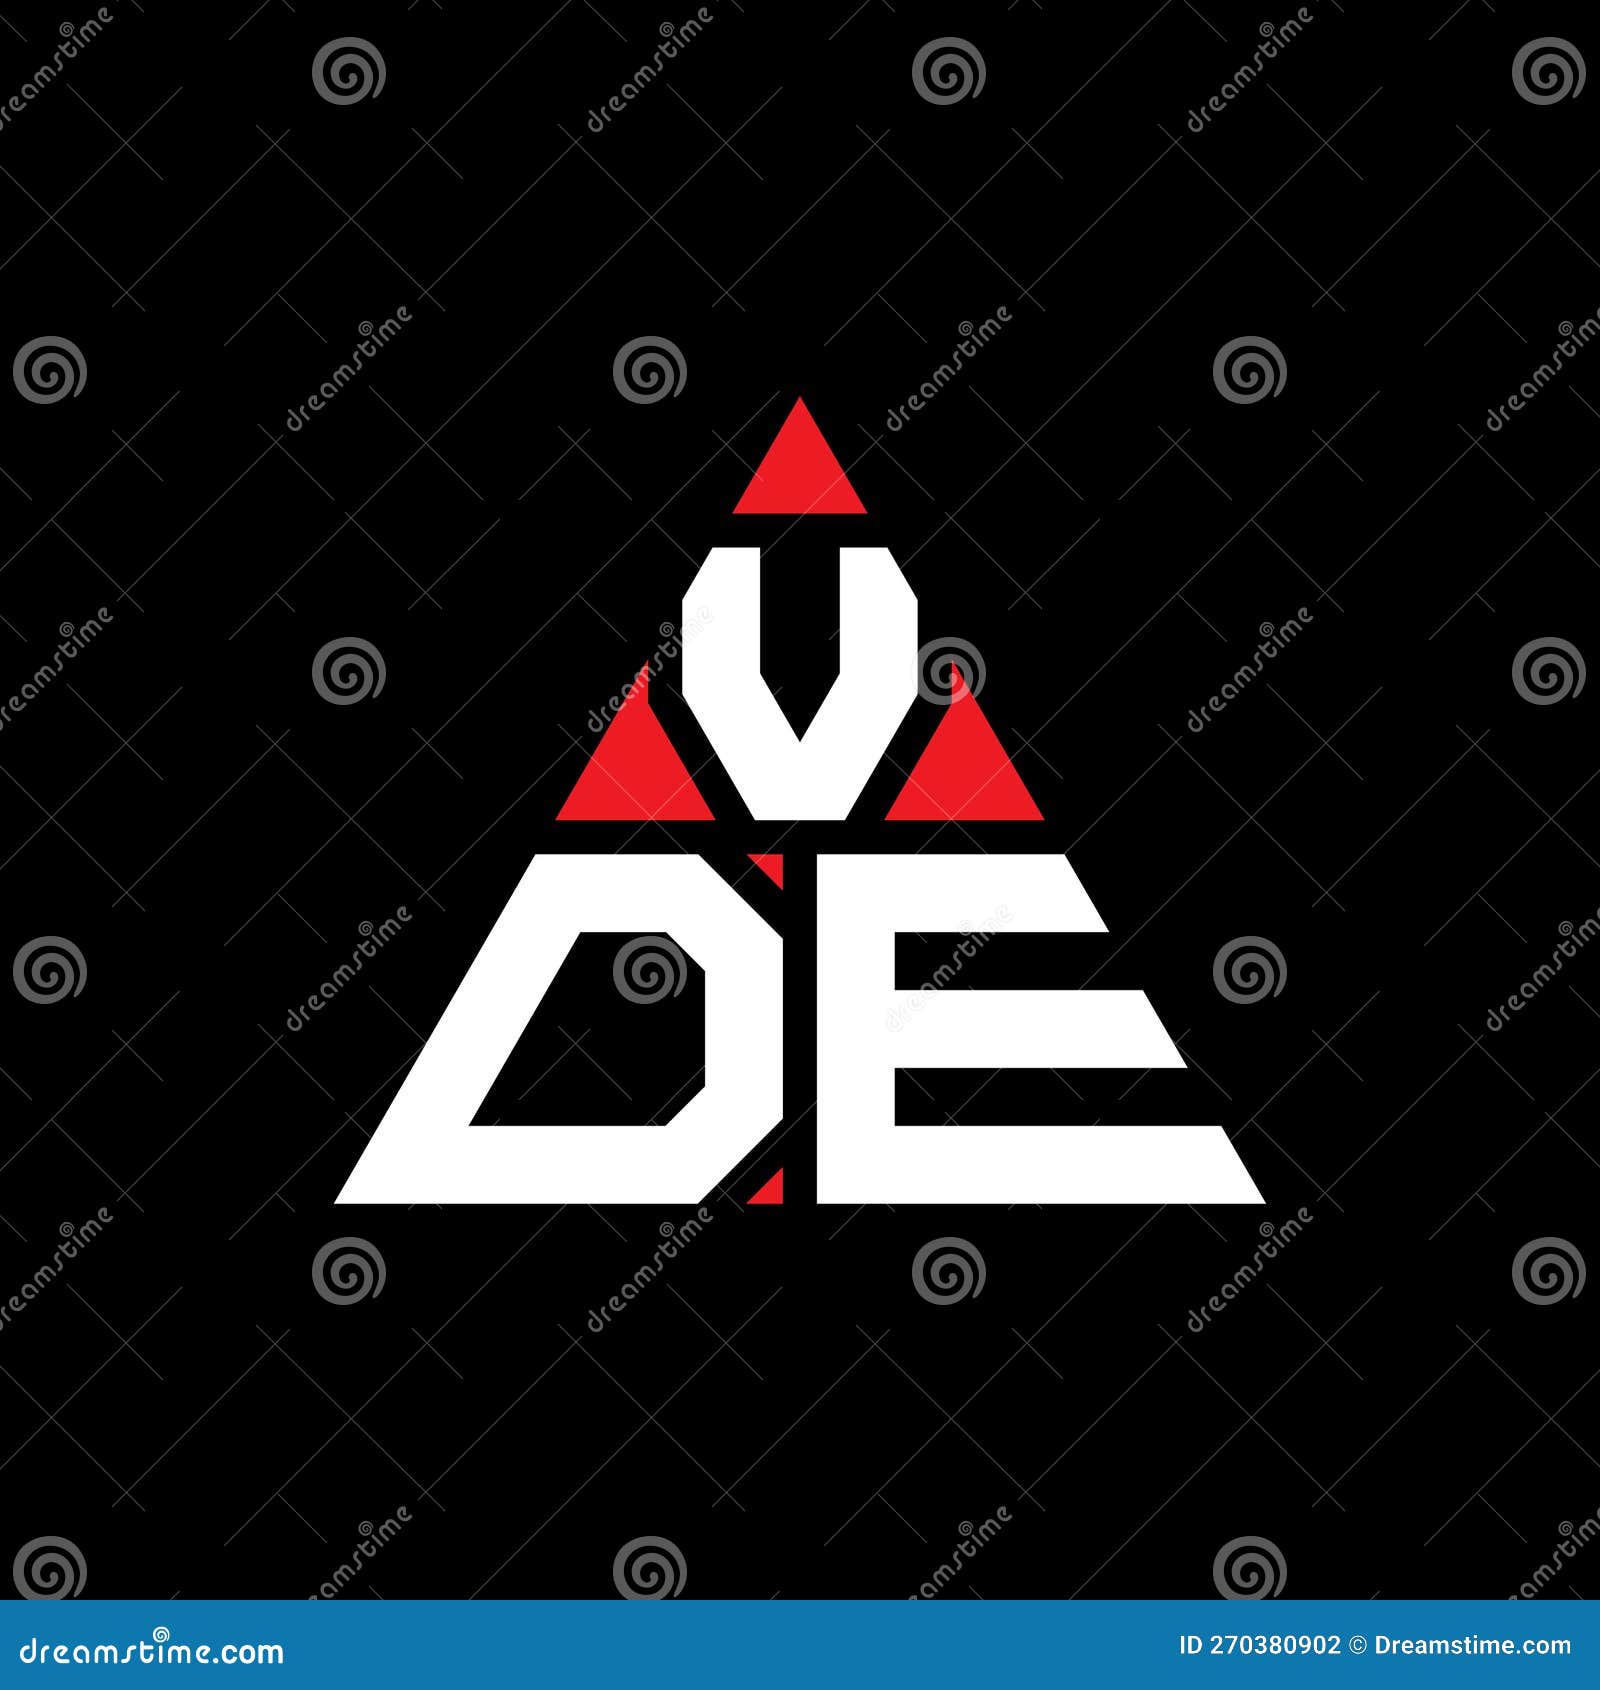 vde triangle letter logo  with triangle . vde triangle logo  monogram. vde triangle  logo template with red